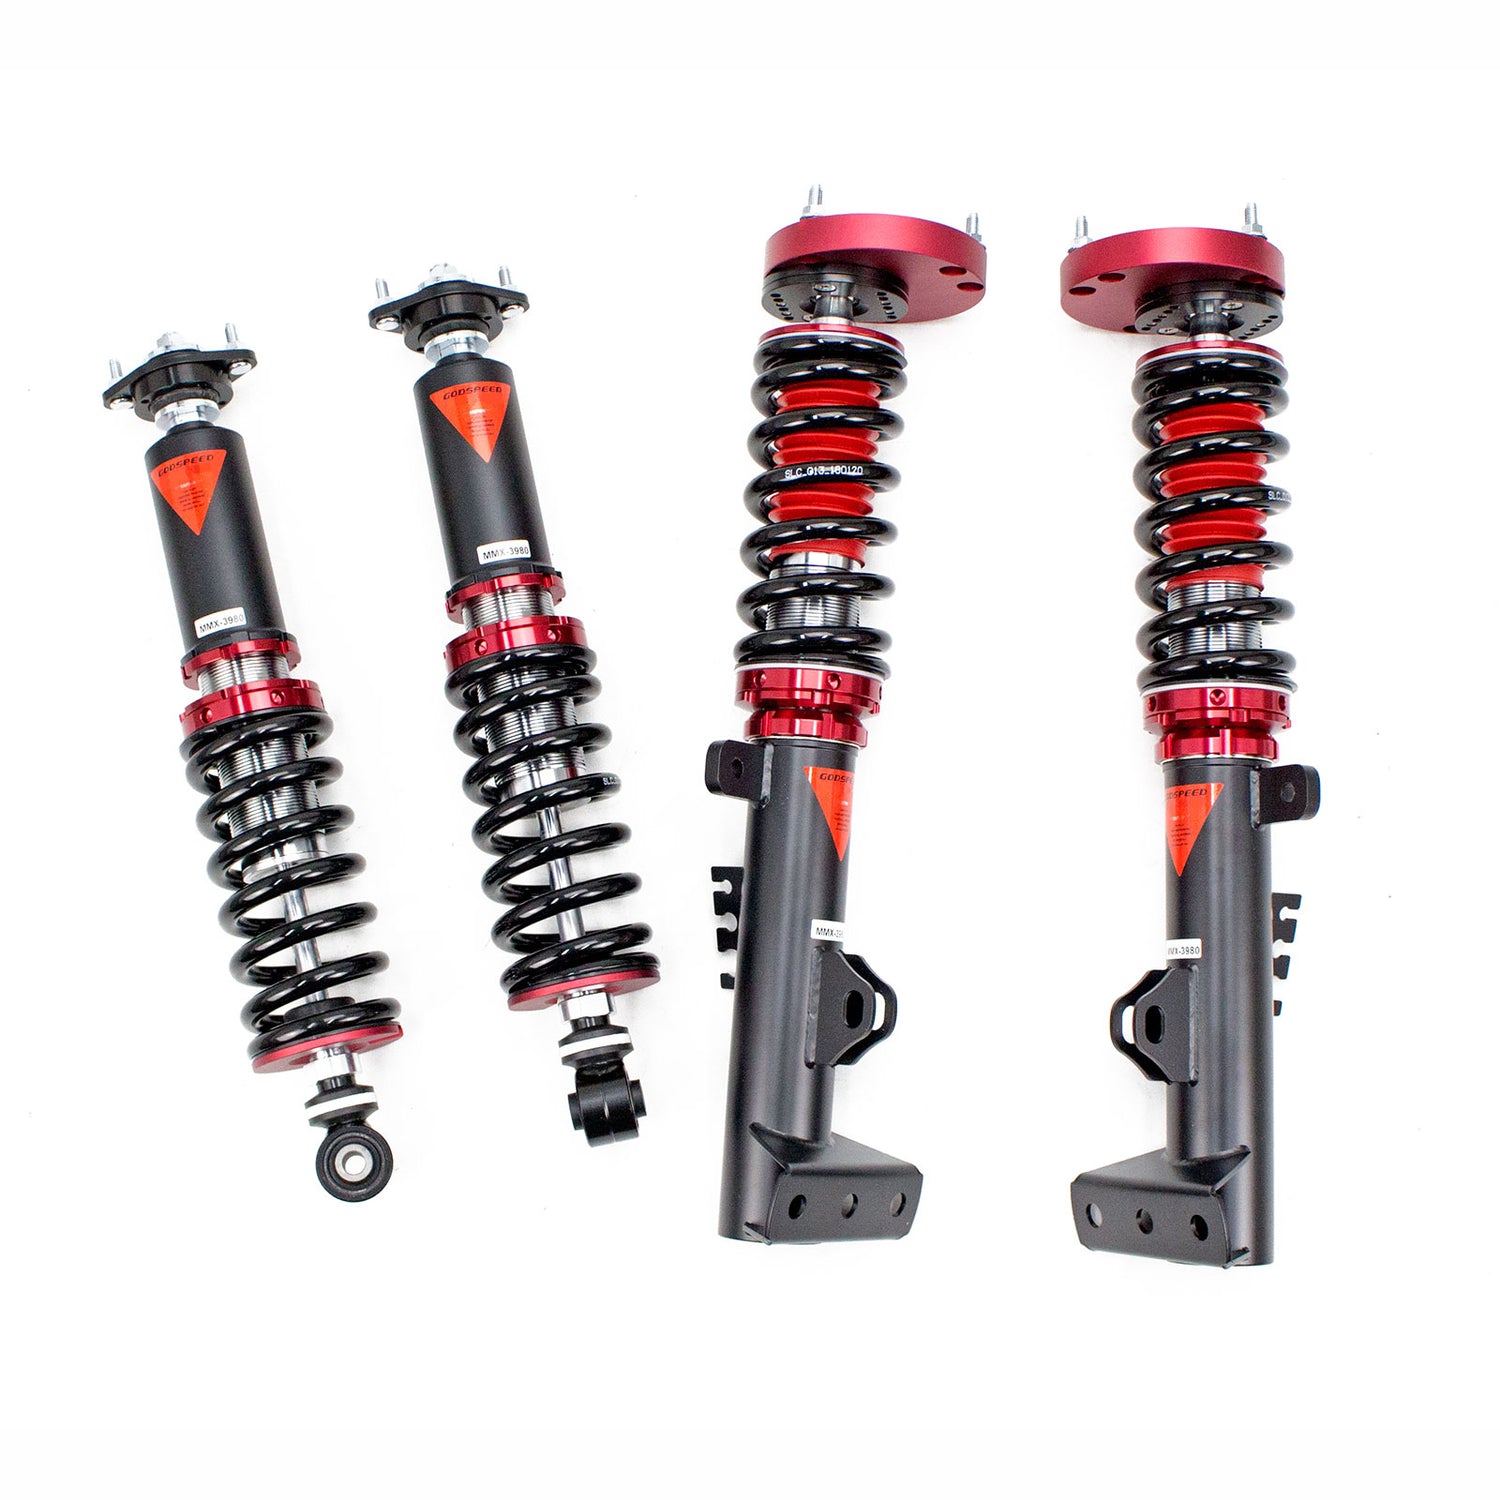 MMX3980 MAXX Coilovers Lowering Kit, Fully Adjustable, Ride Height, 40 Clicks Rebound Settings